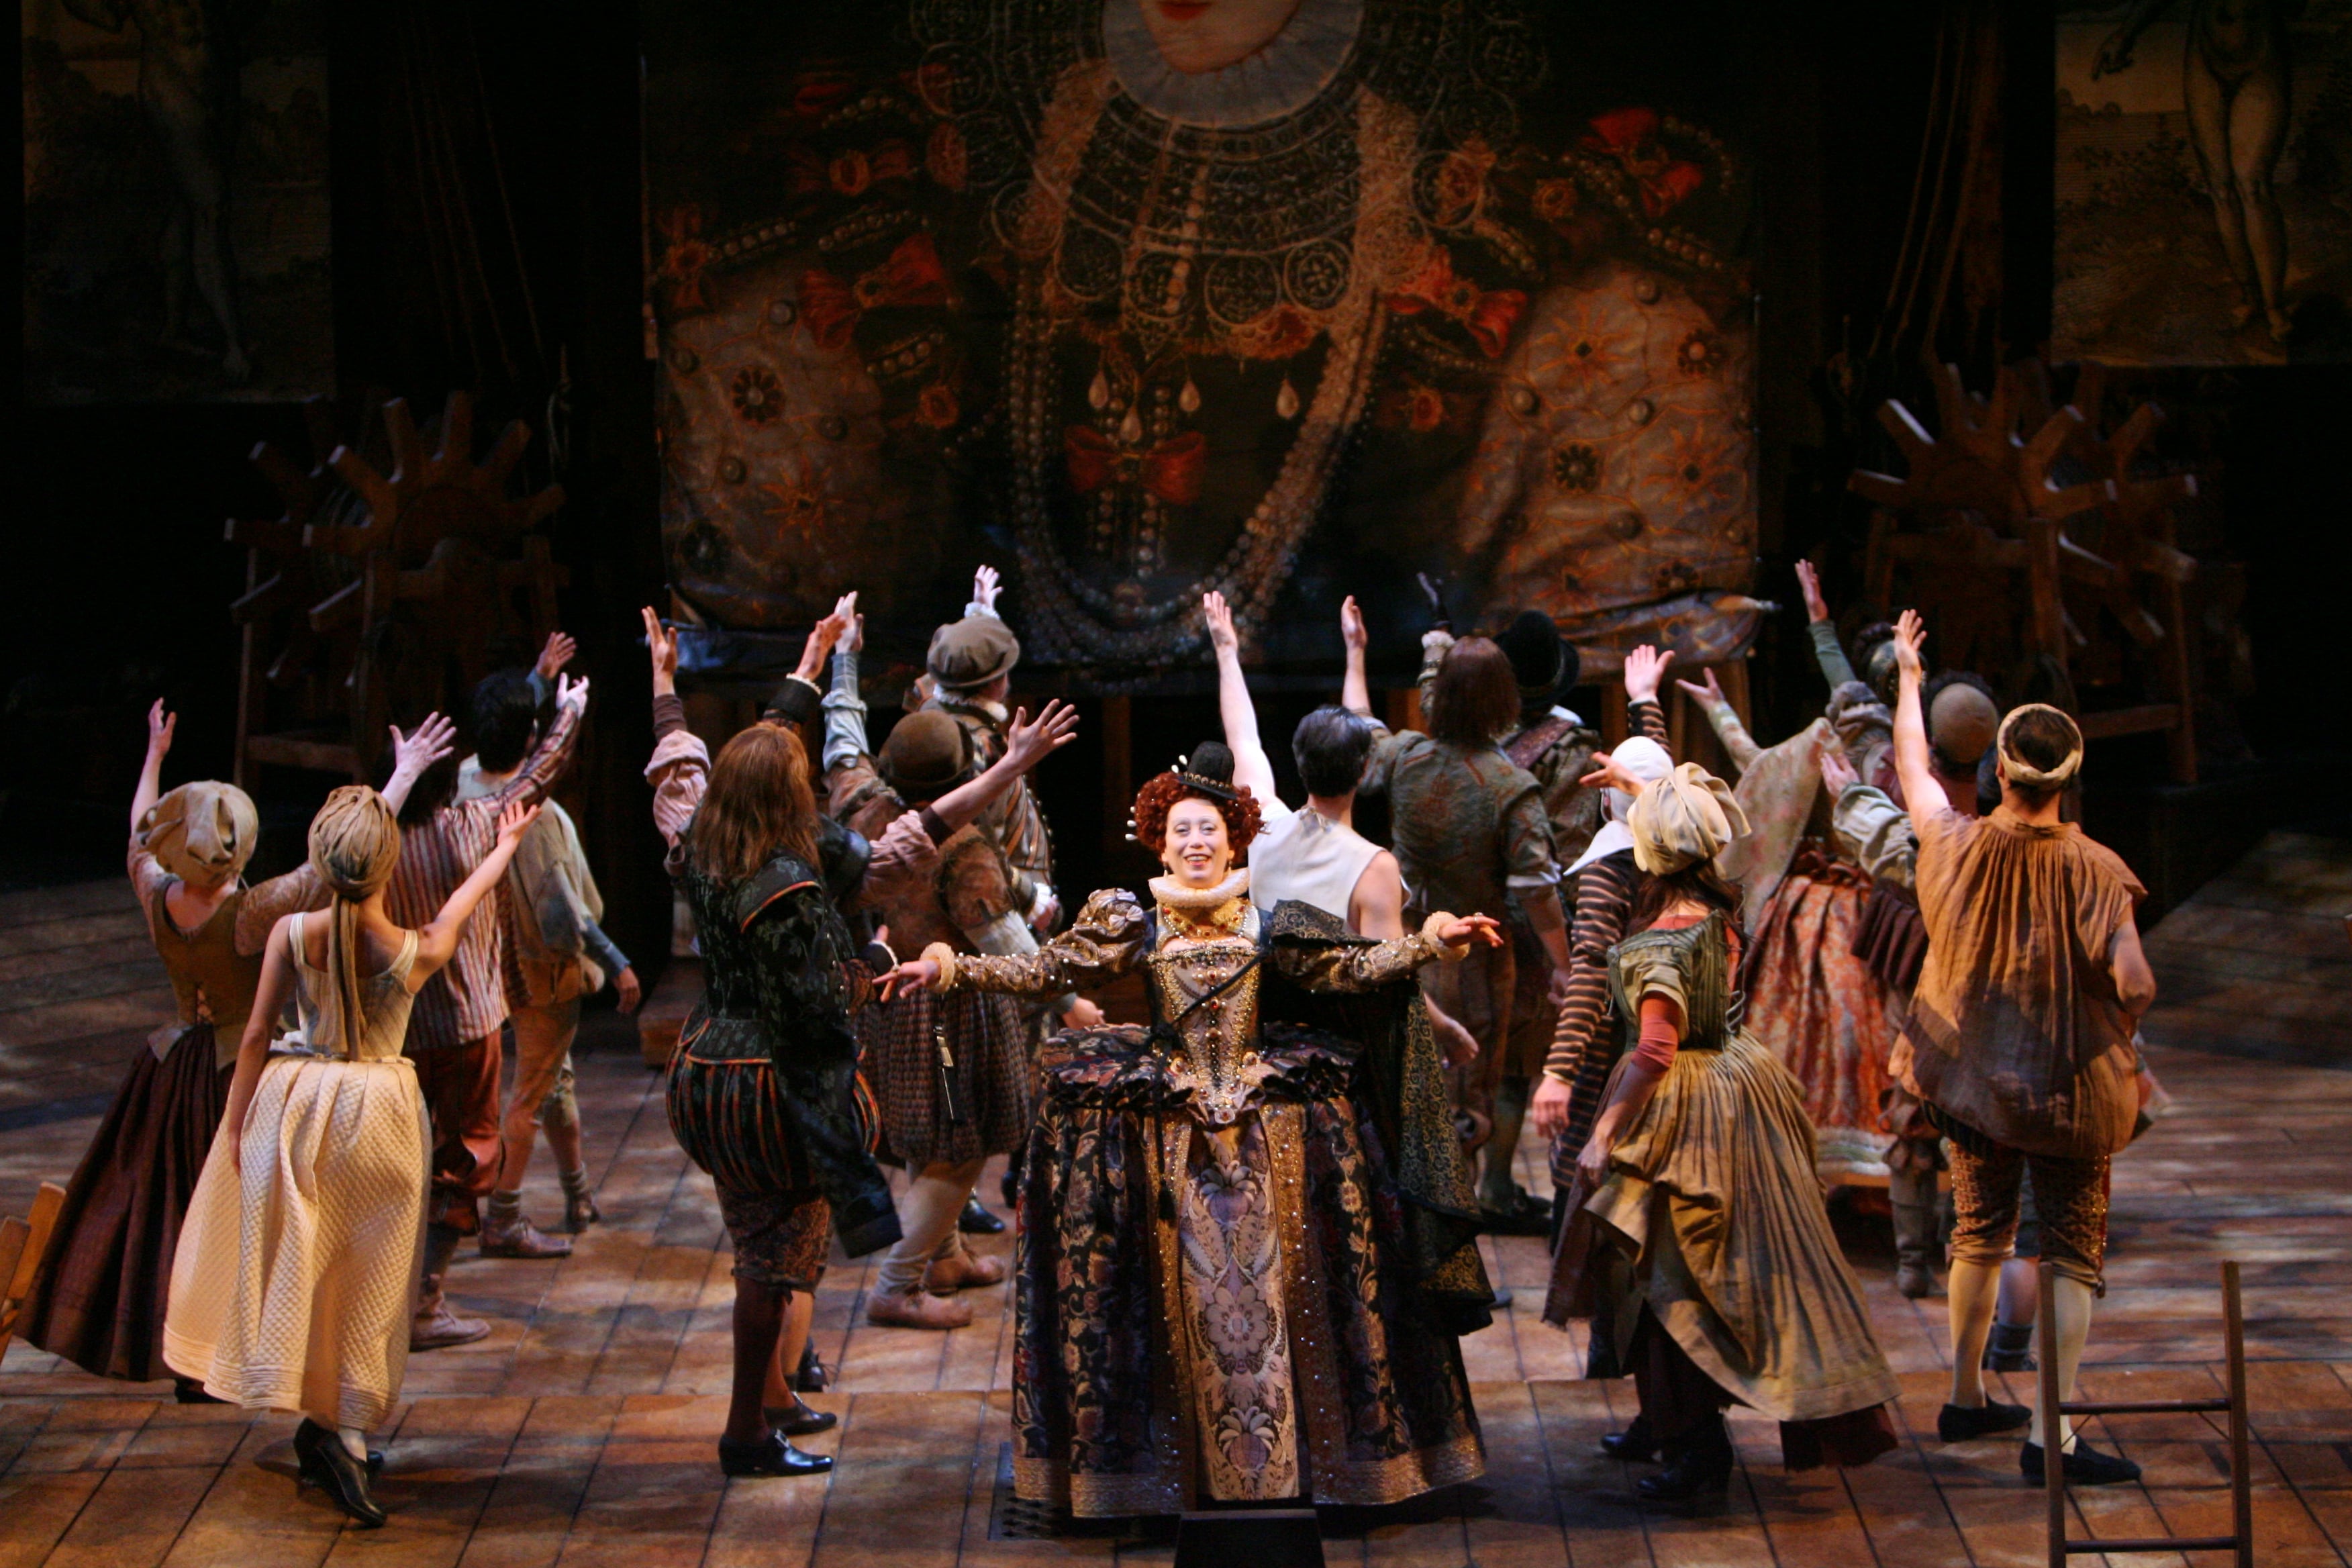 Queen Elizabeth I dances with a company of theatre players saluting her giant portrait in the background.